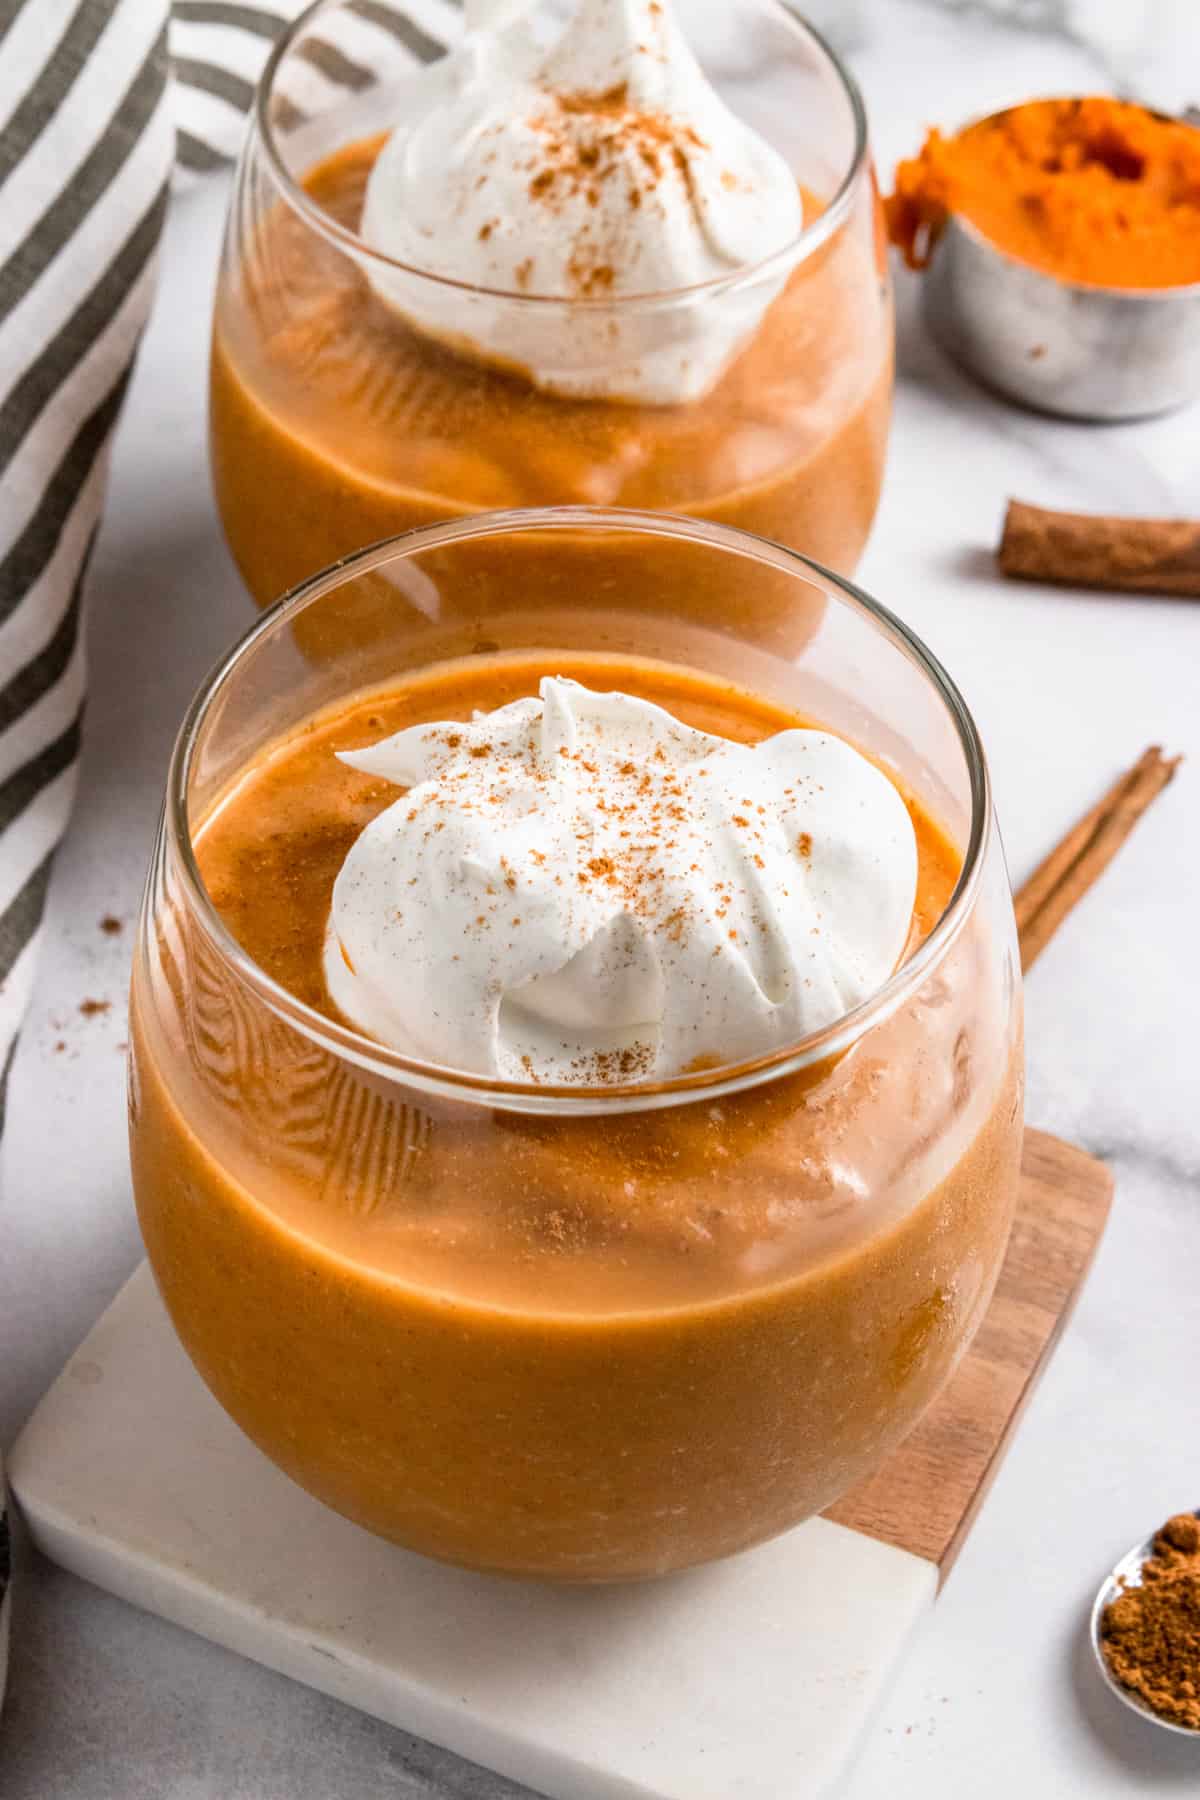 Pumpkin smoothie in glass with whipped cream on top.